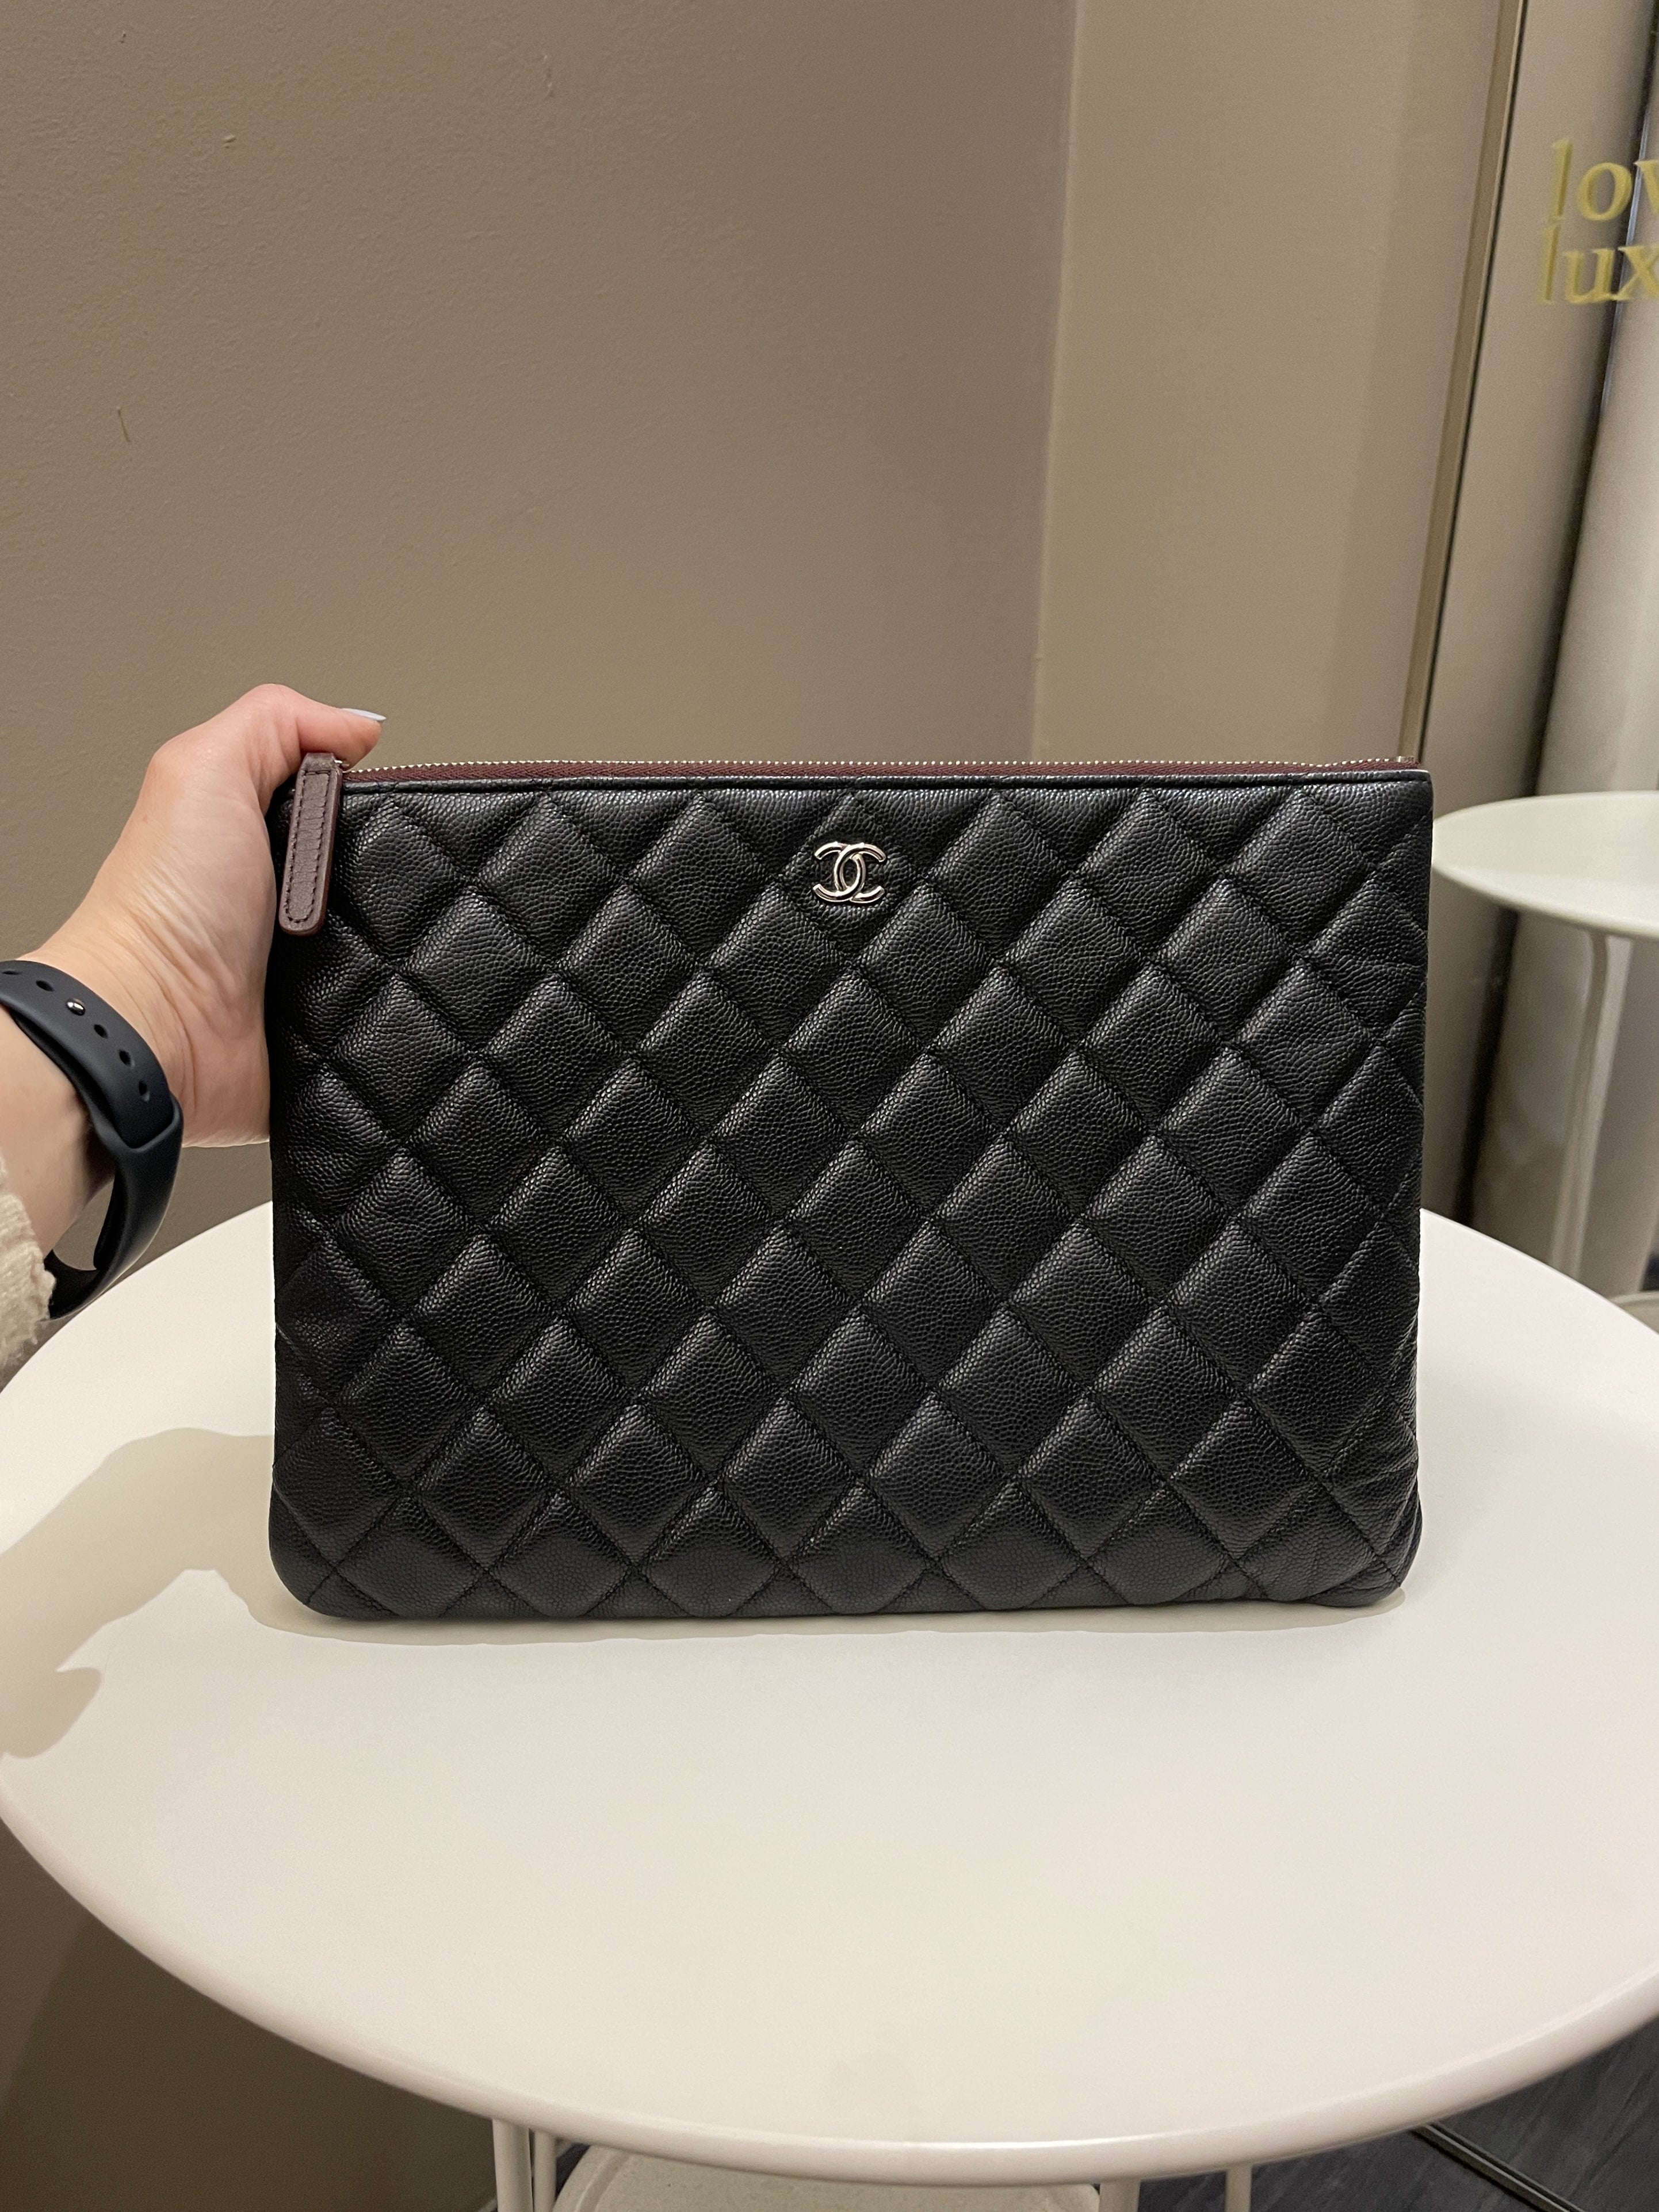 Chanel Classic Quilted Ocase Clutch
Black Caviar